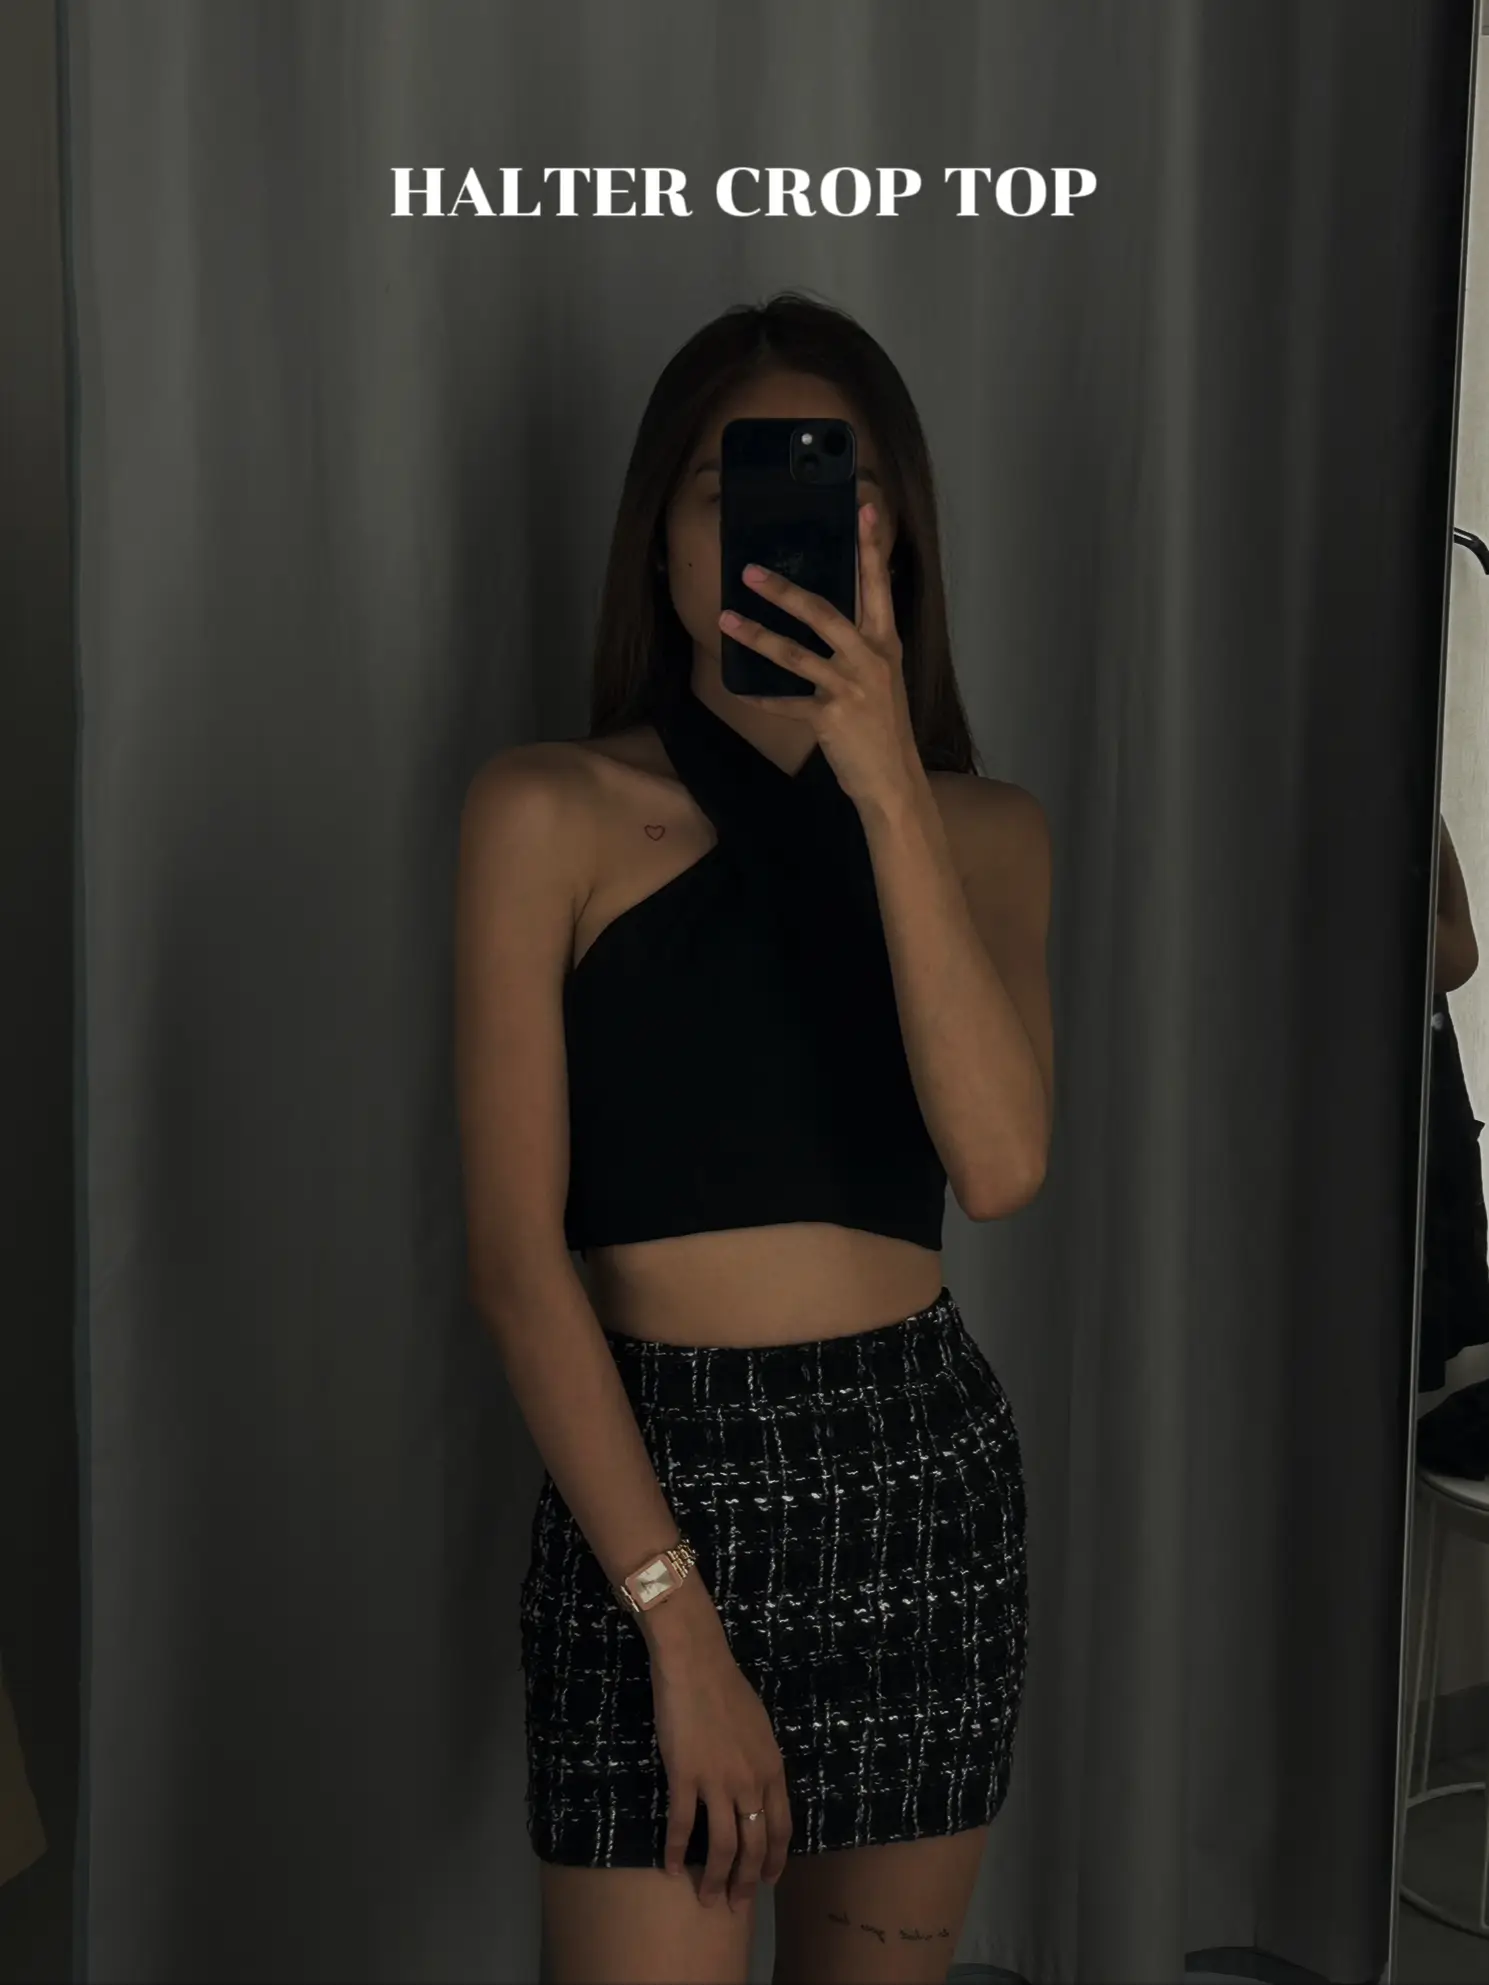 TRYING ON NEW ARRIVALS AT H&M, Gallery posted by Ria Melvy